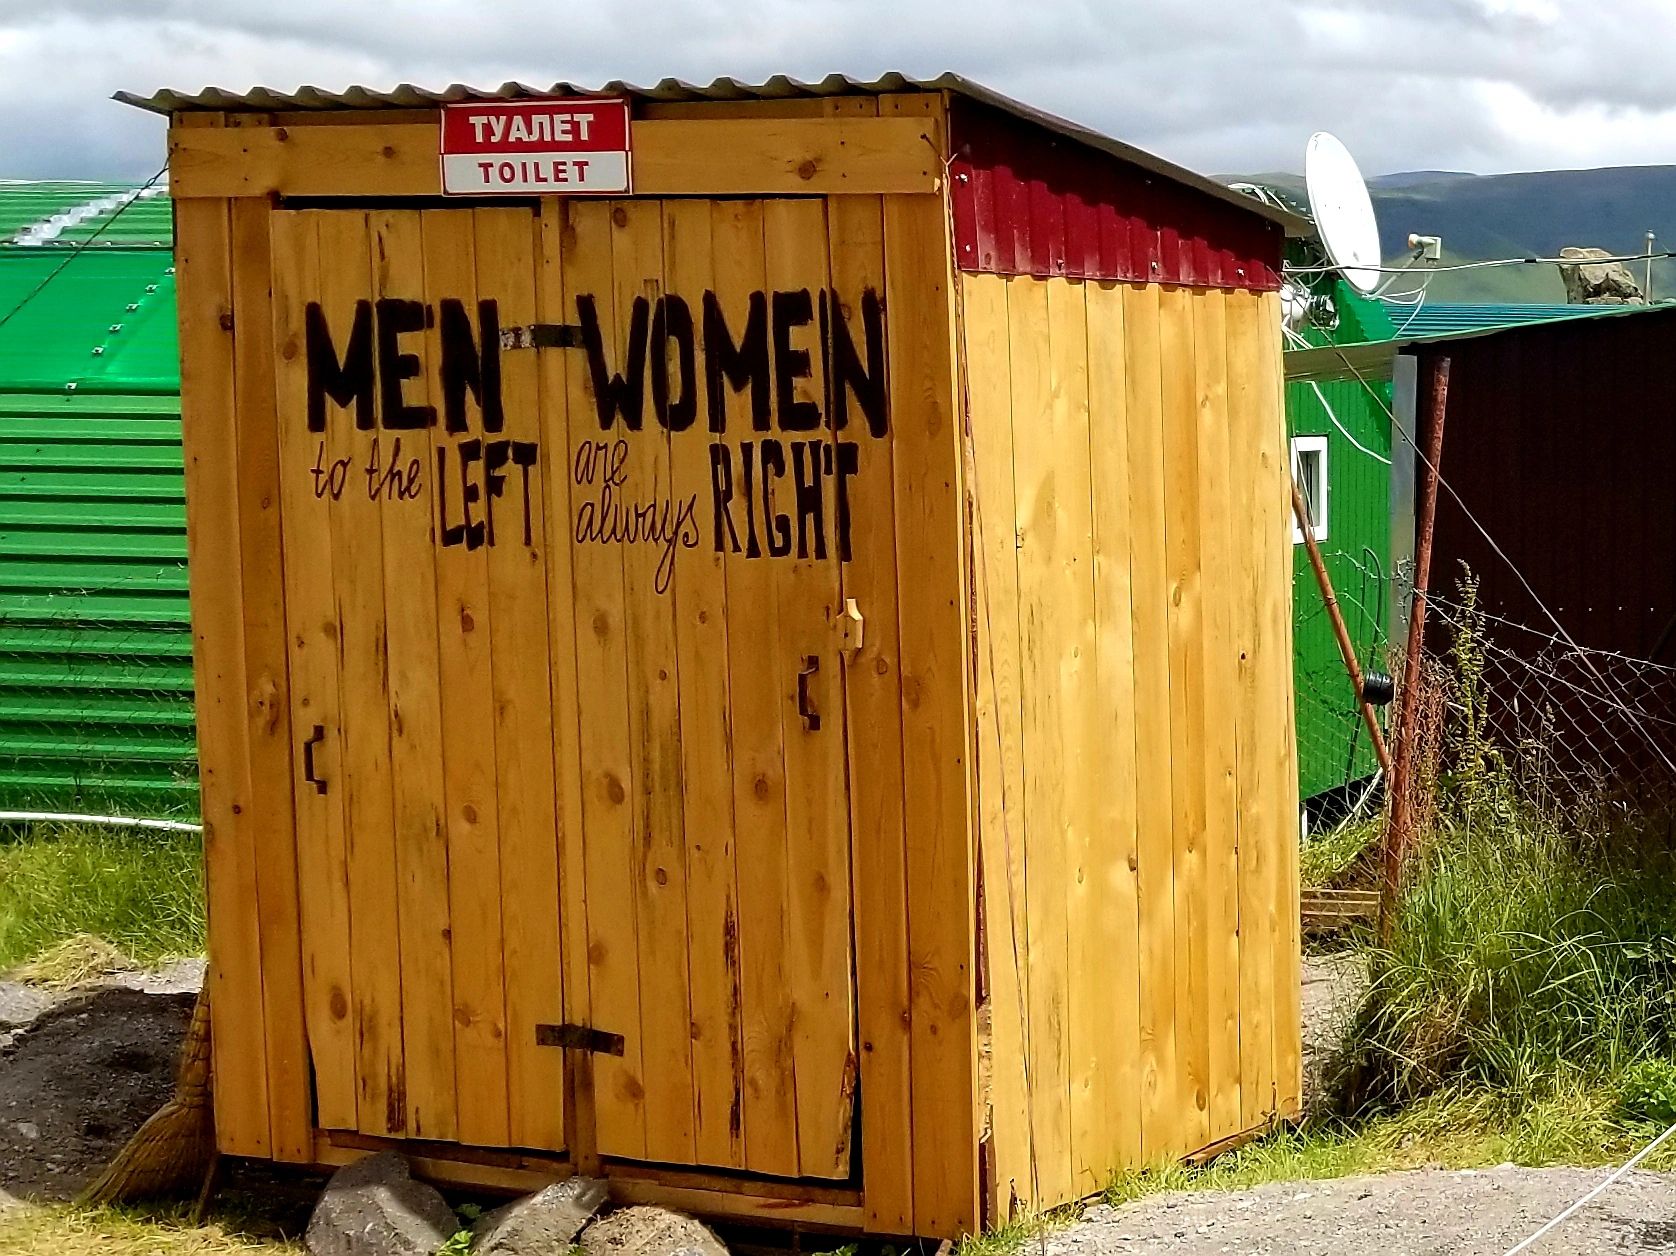 Latrine at Base Camp on Mount Elbrus, Russia.  Women are always right!